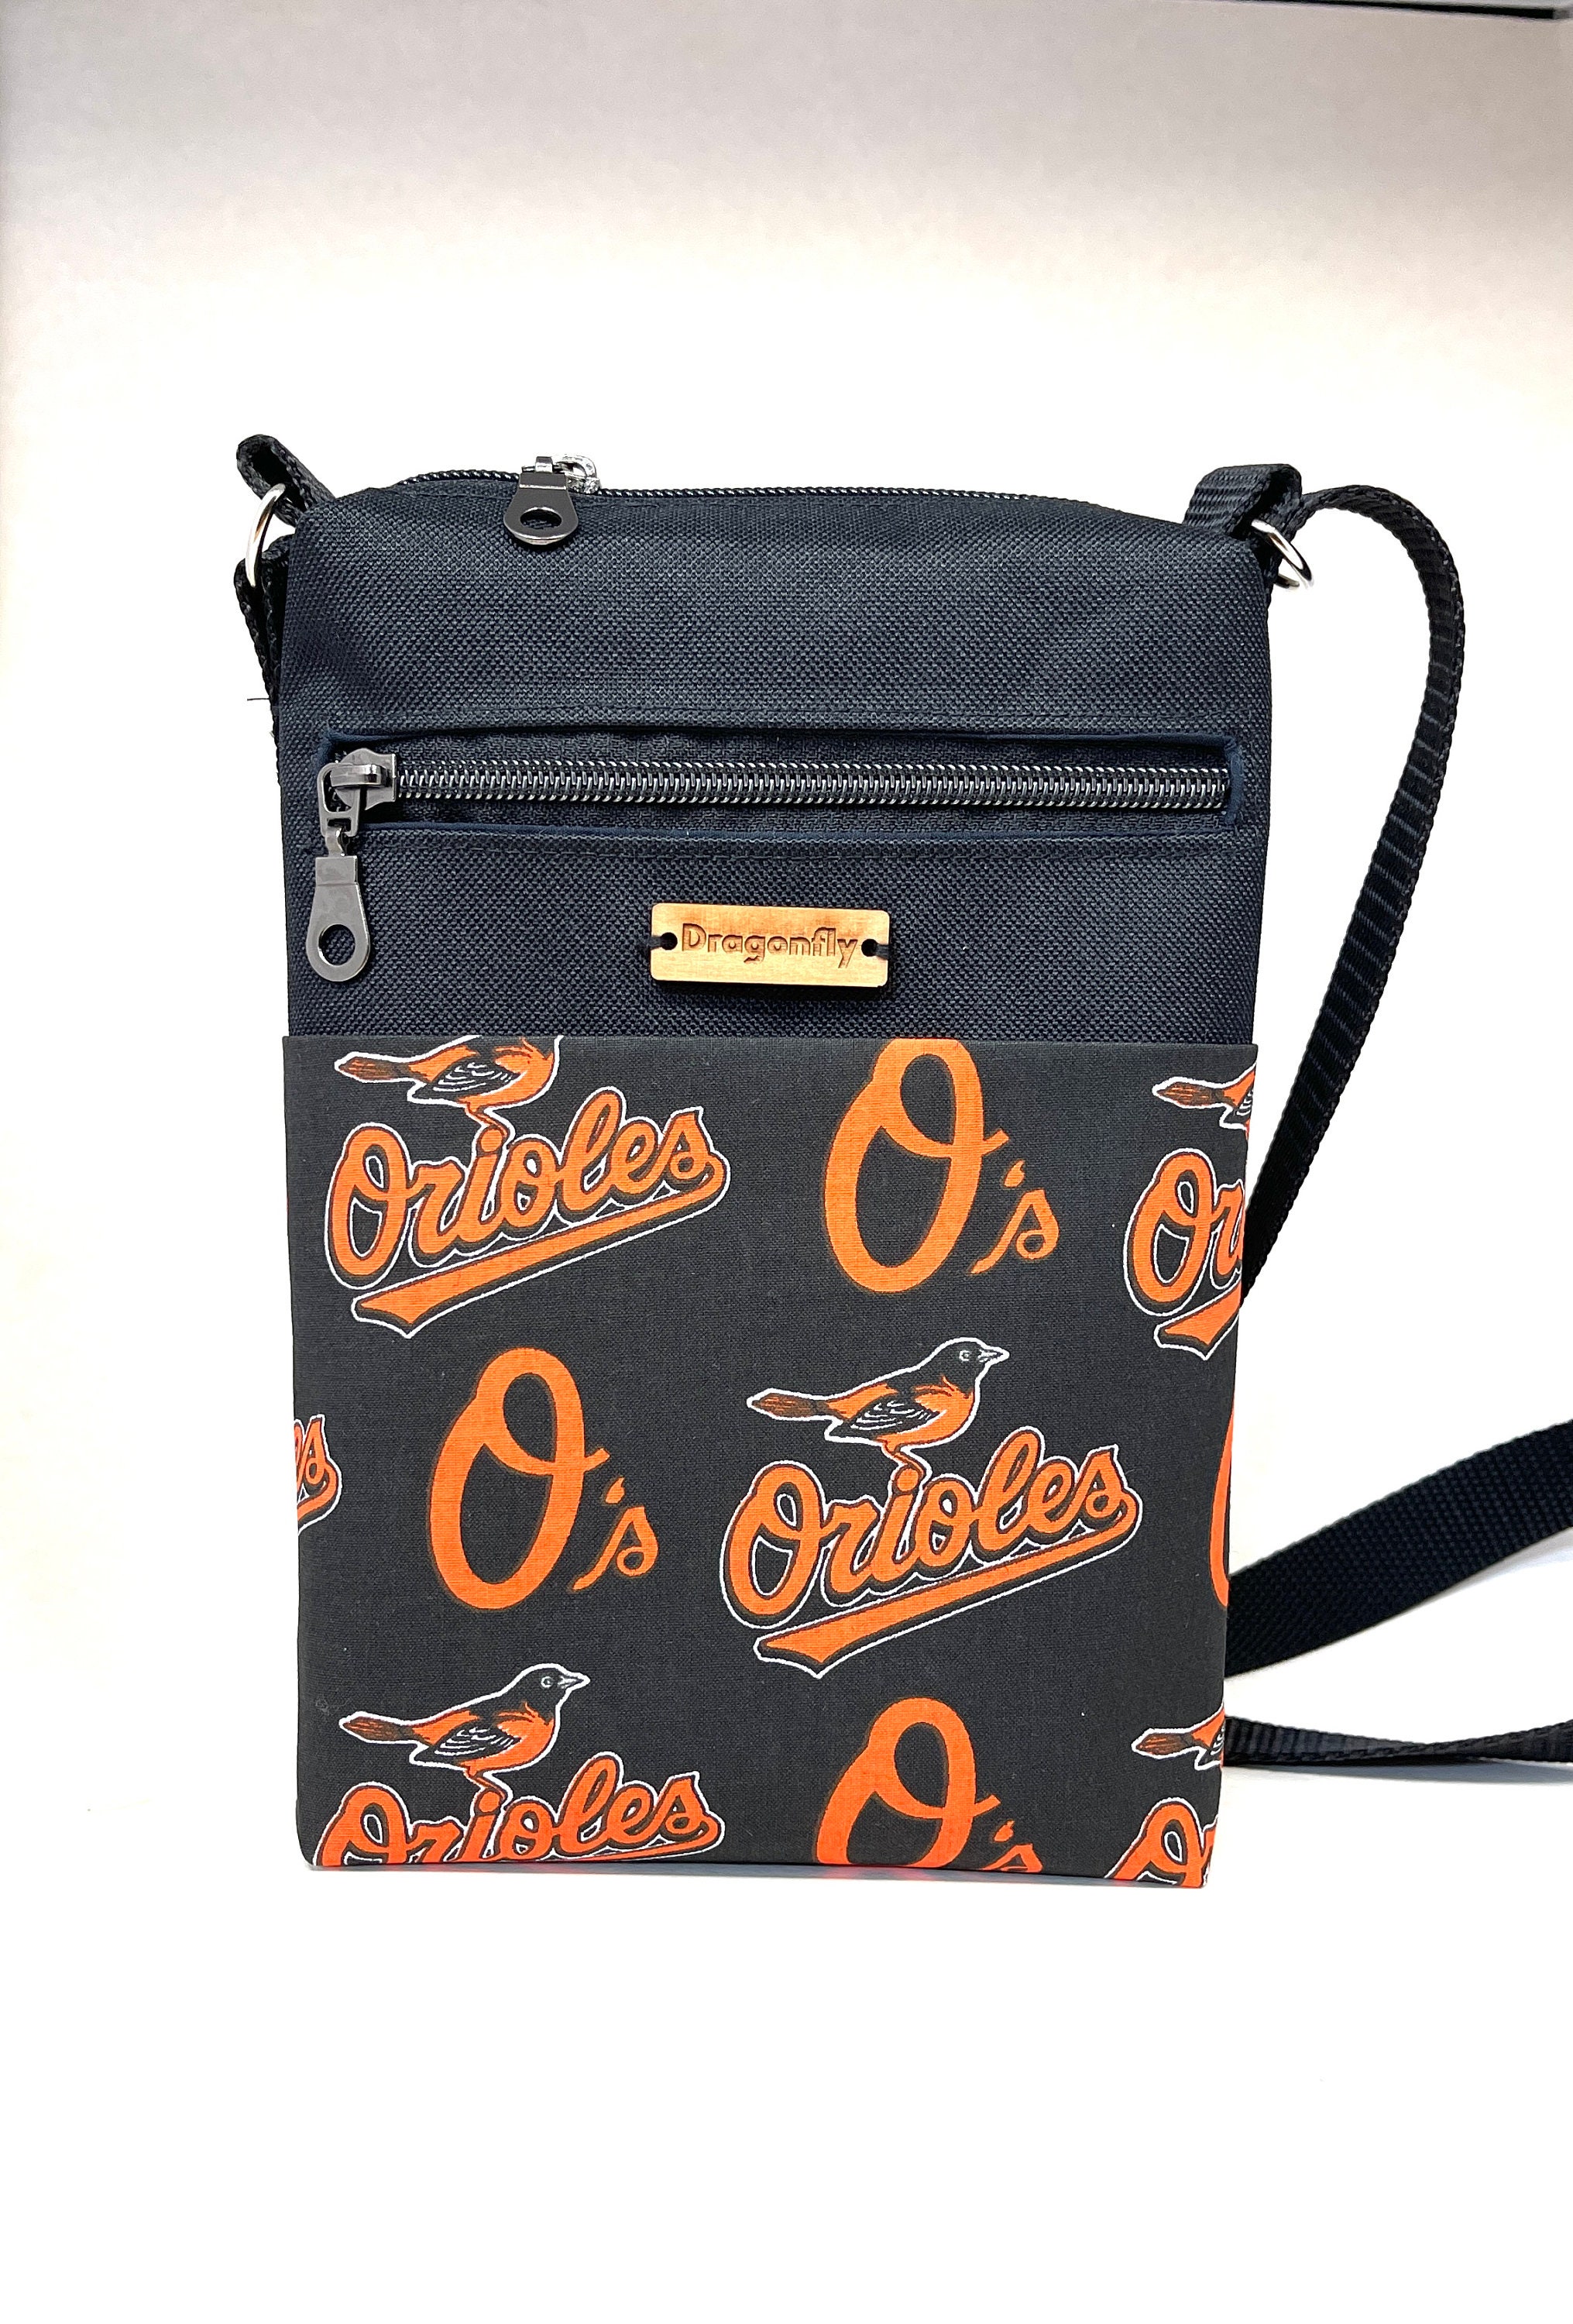 Mlb Accessories Bags Singapore Sale - Mlb For Cheap Online